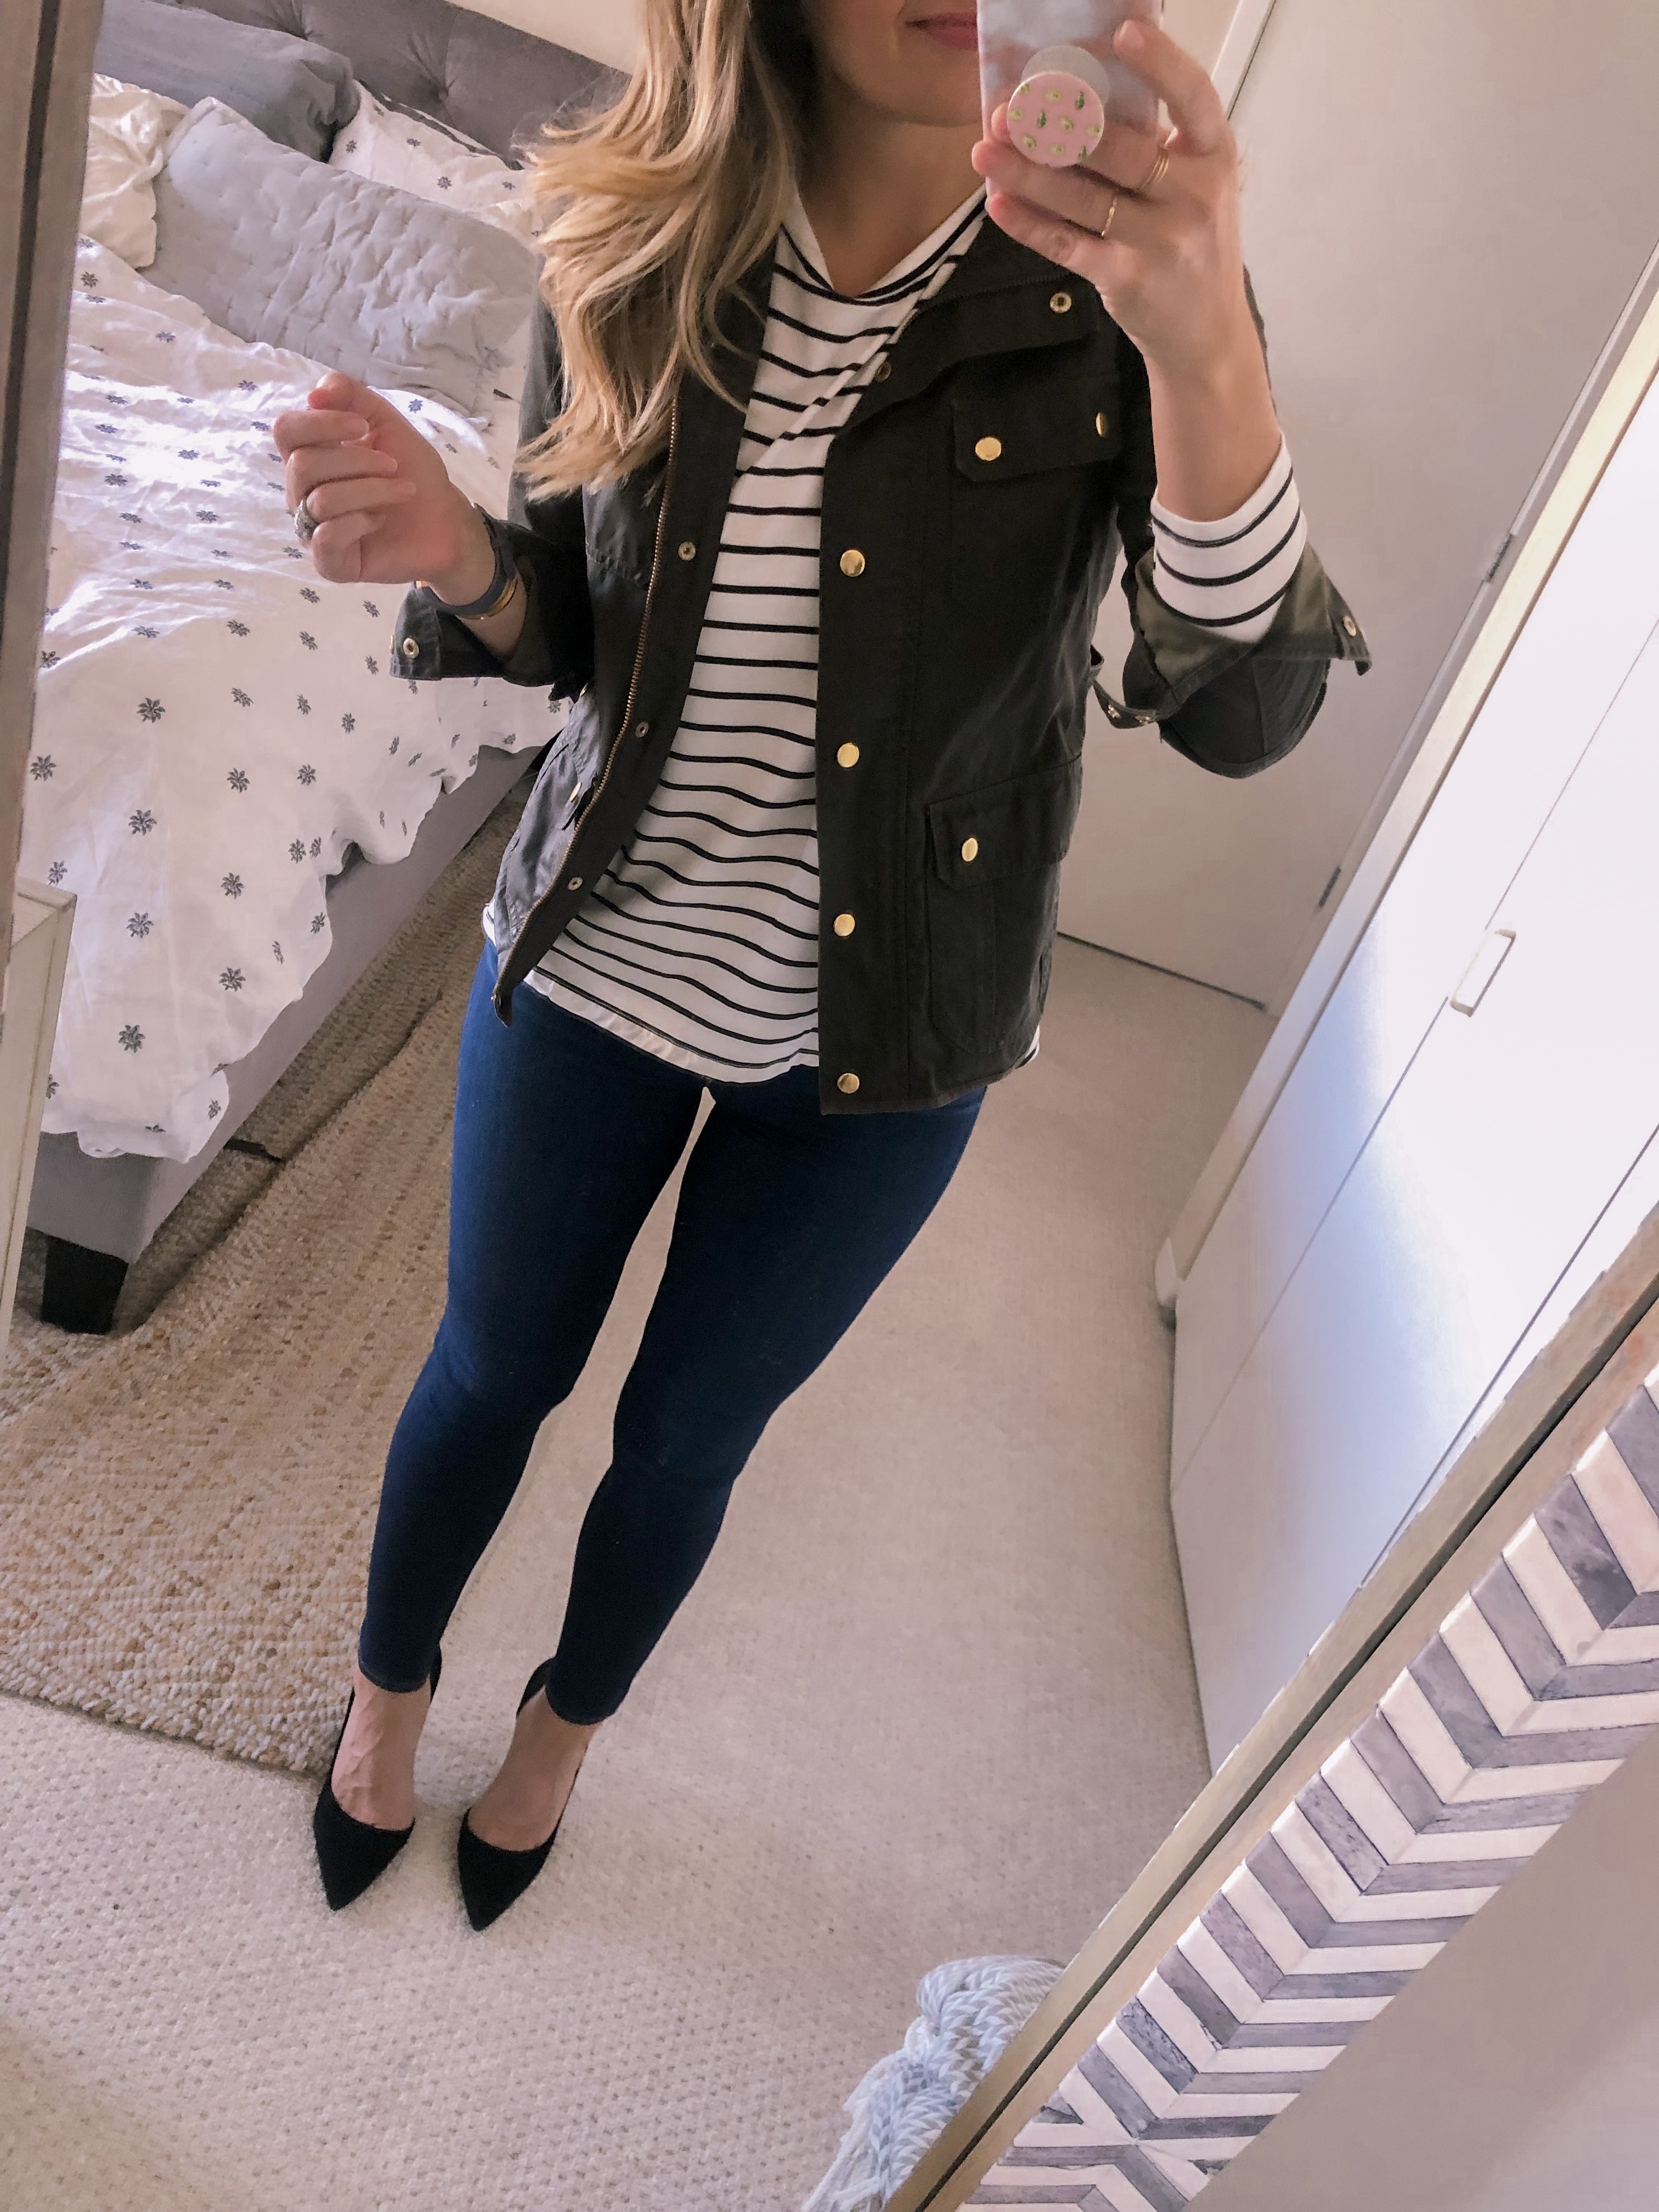 j.crew olive green military jacket with a black and white striped shirt and the best skinny jeans